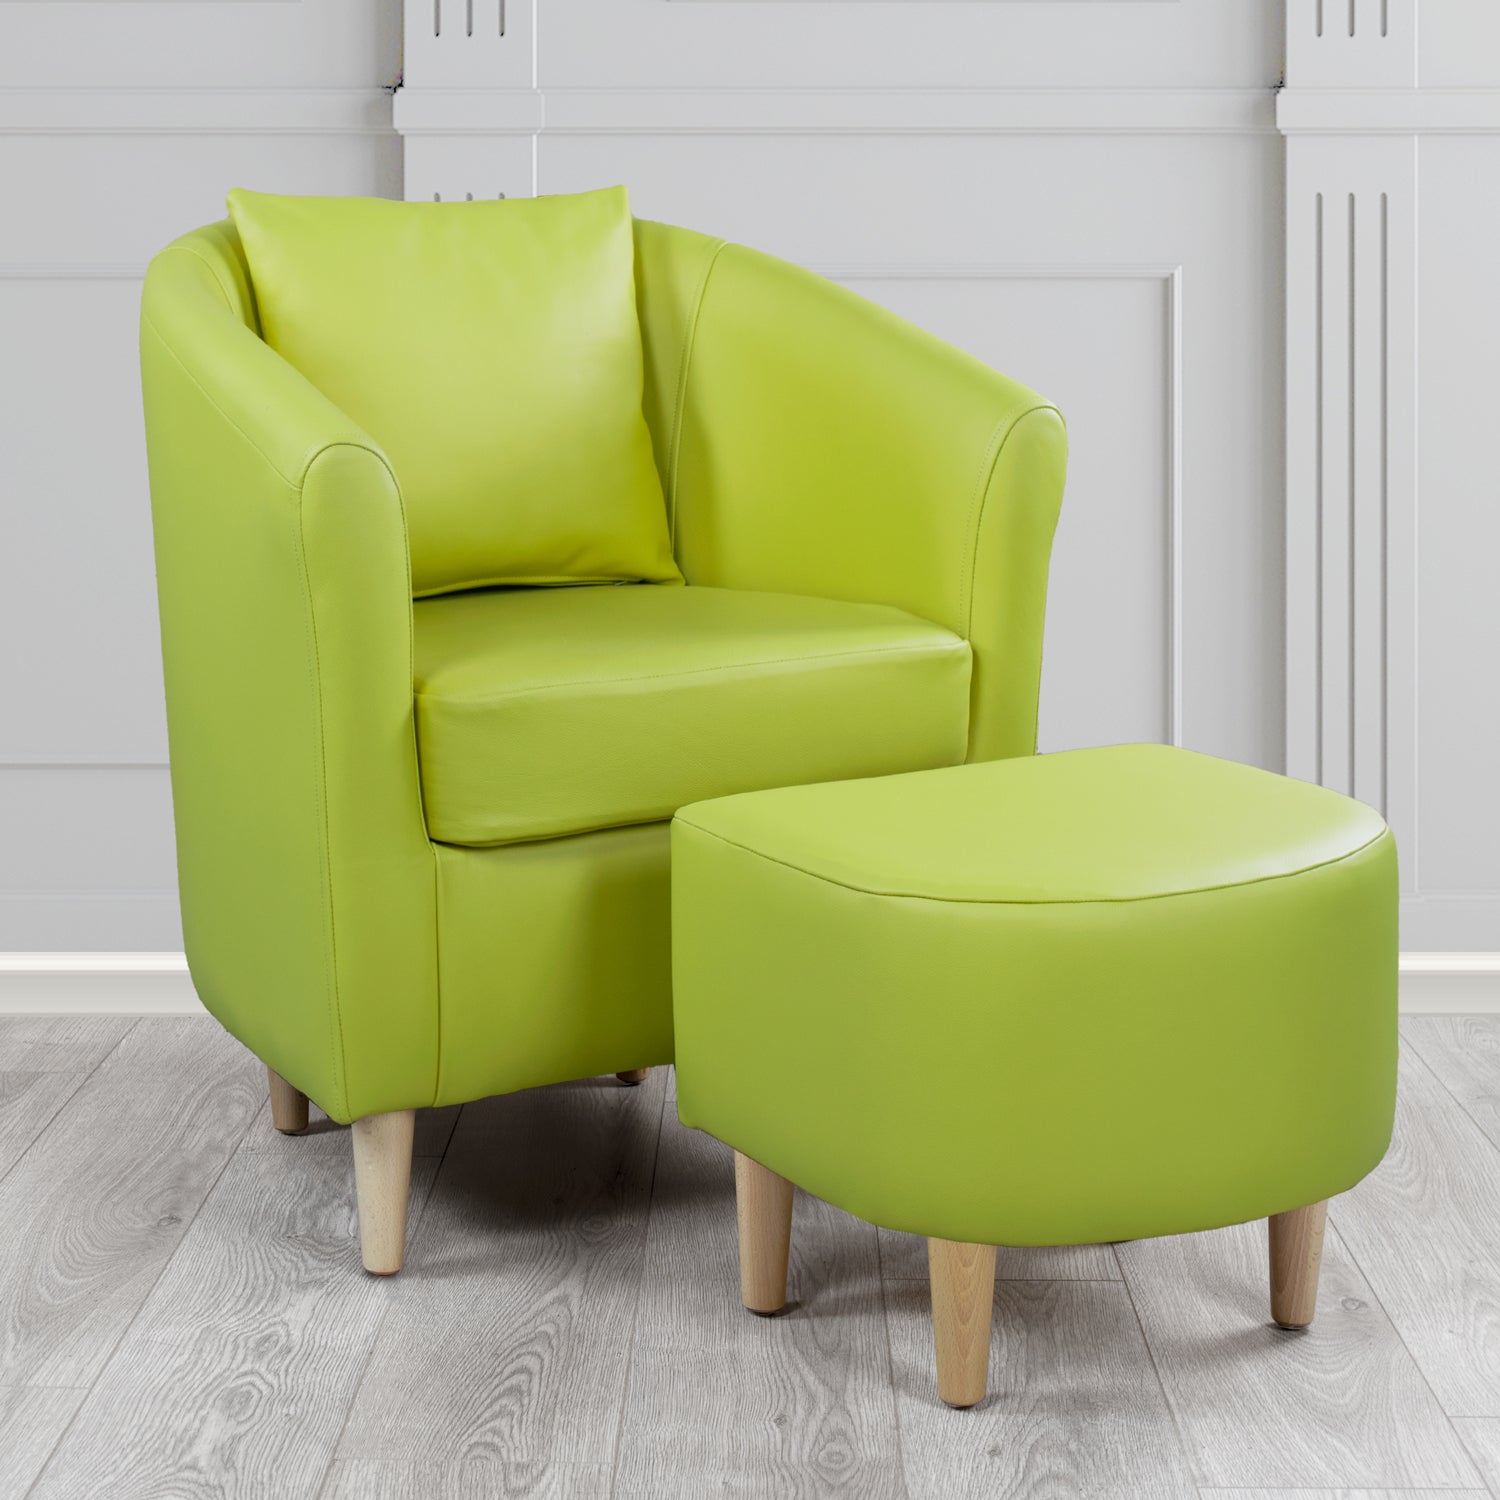 St Tropez Shelly Field Green Crib 5 Genuine Leather Tub Chair & Footstool Set With Scatter Cushion (6619492089898)